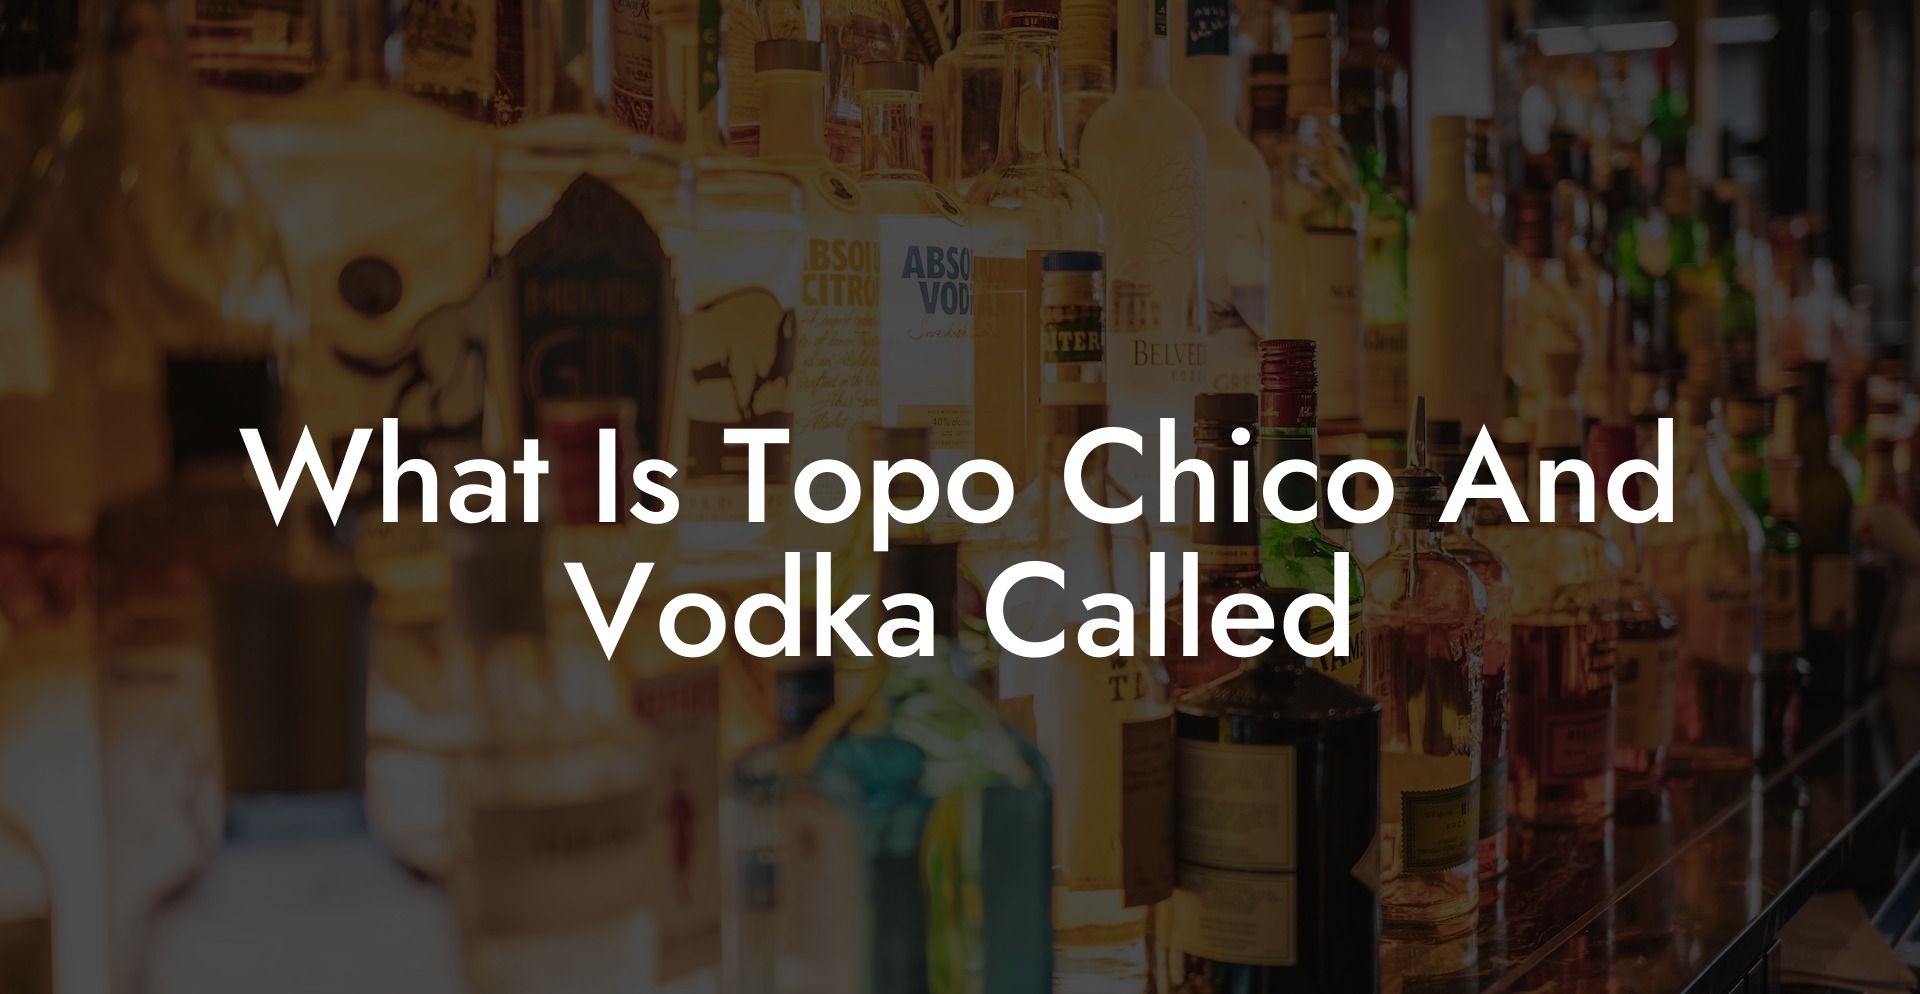 What Is Topo Chico And Vodka Called